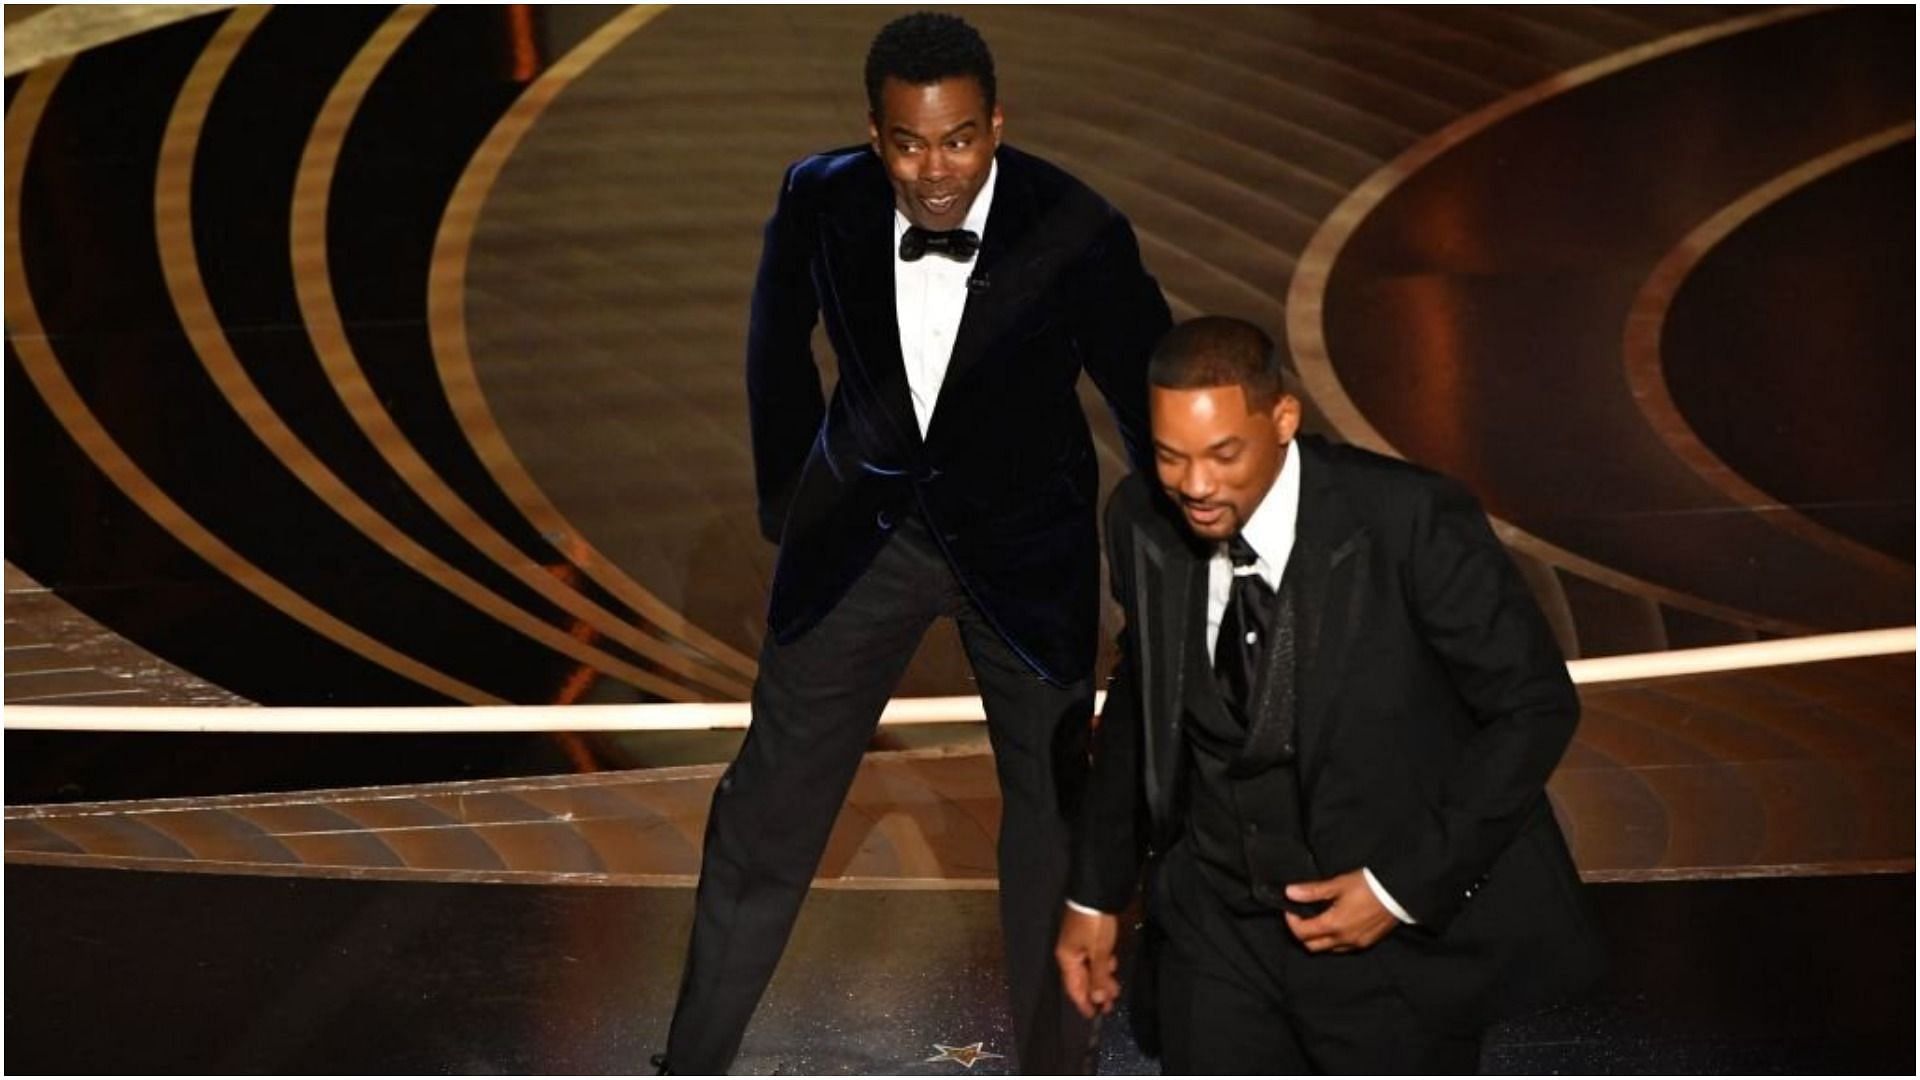 Will Smith walks away from Chris Rock onstage (Image via Robyn Beck/Getty Images)